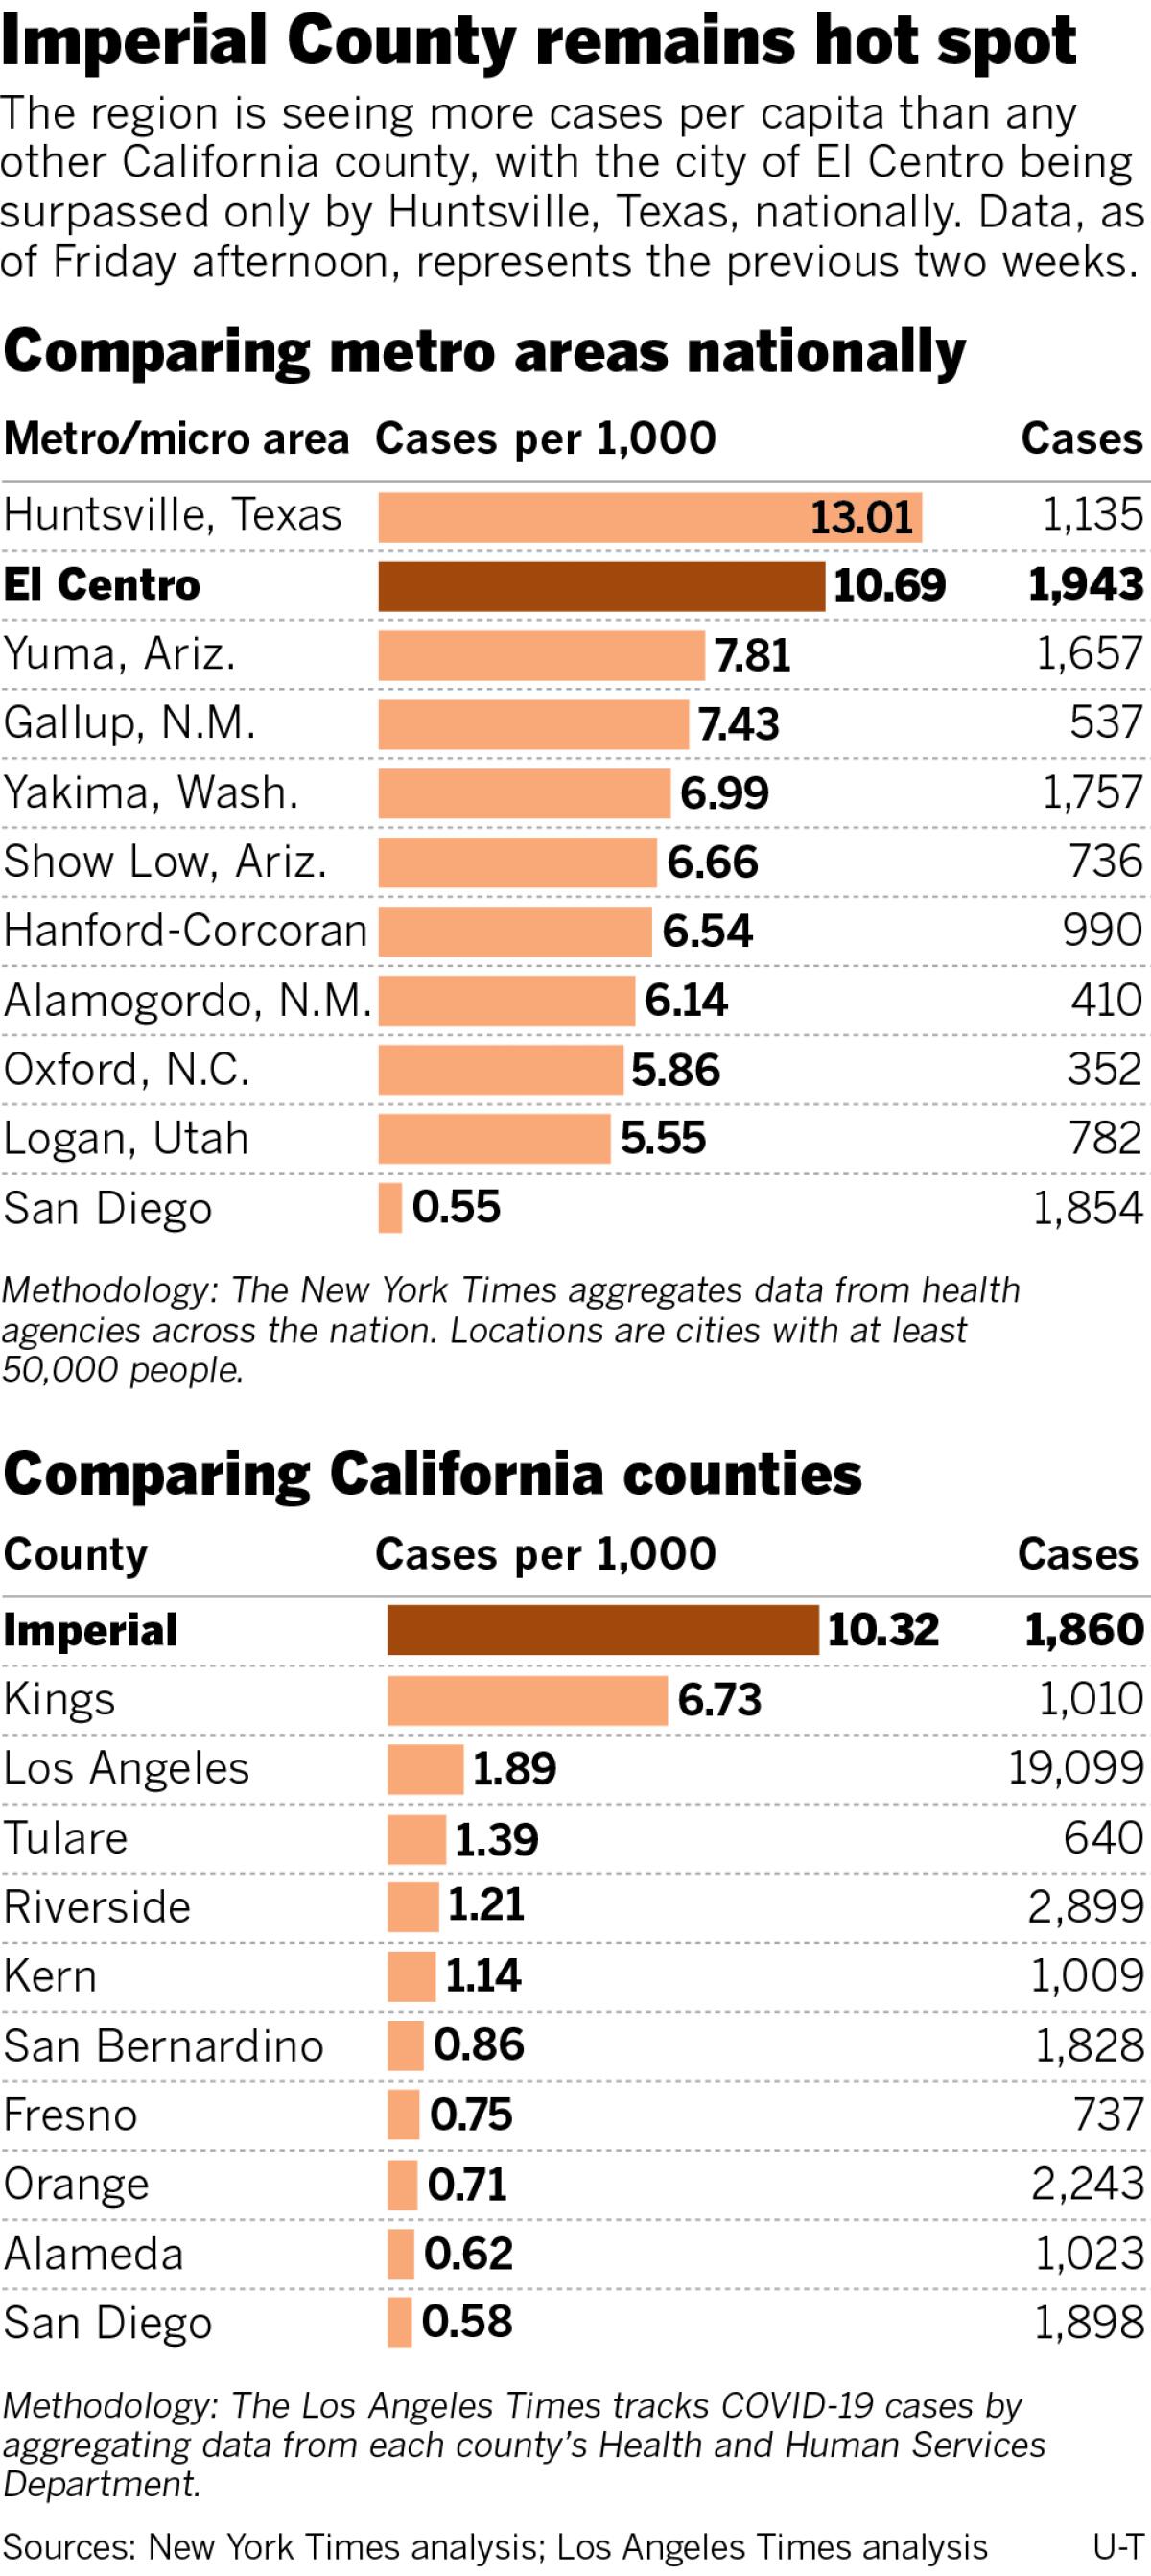 Imperial County remains hotspot with more COVID cases per capita than any other California county.